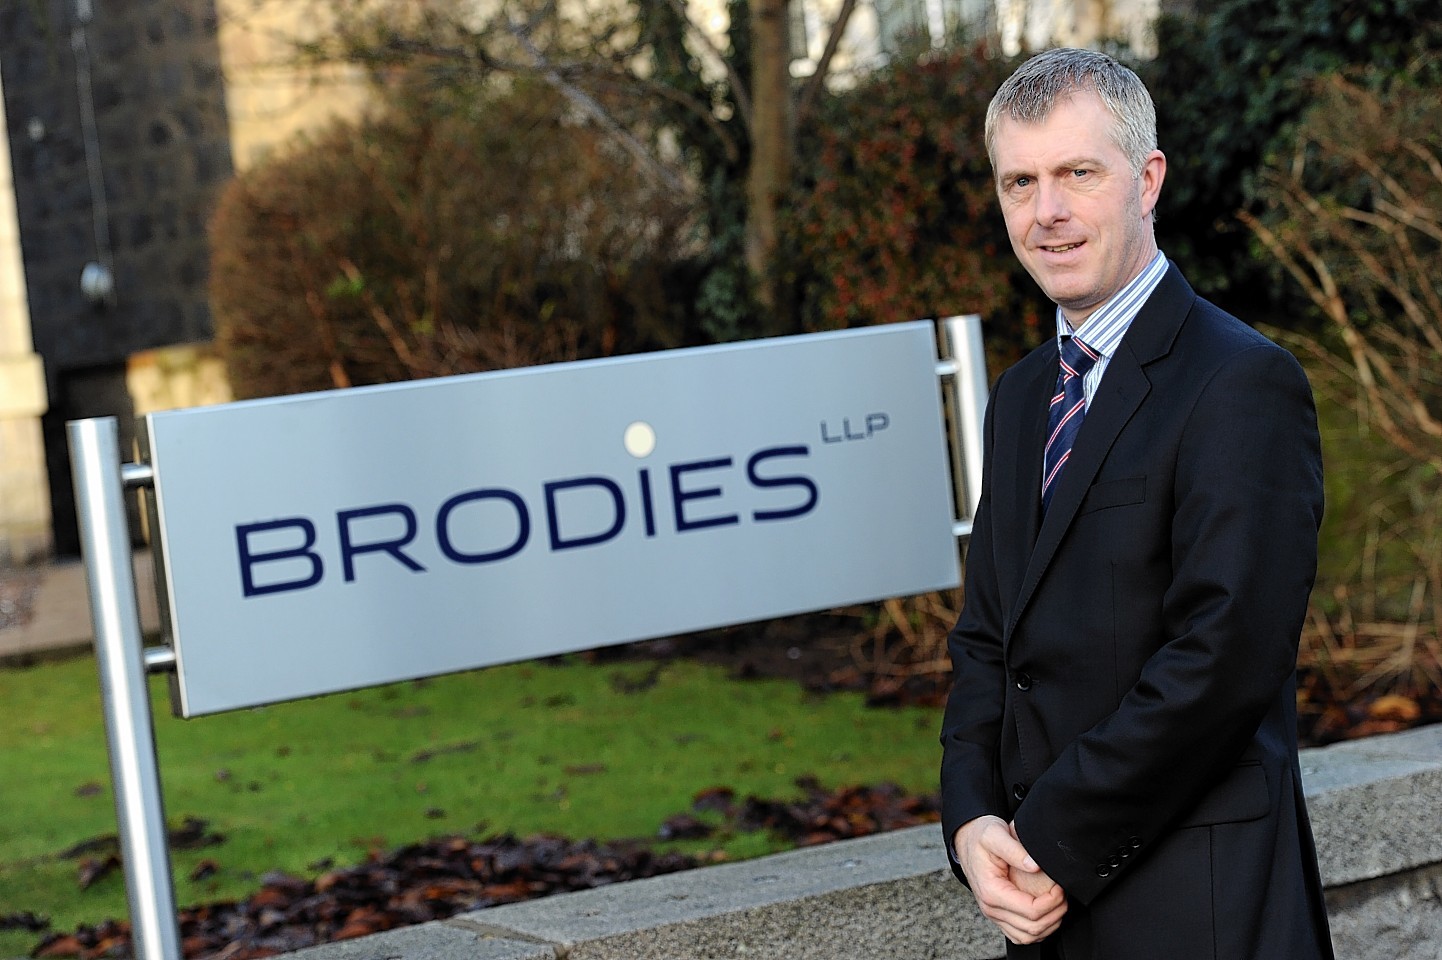 Clive Phillips of Brodies LLP